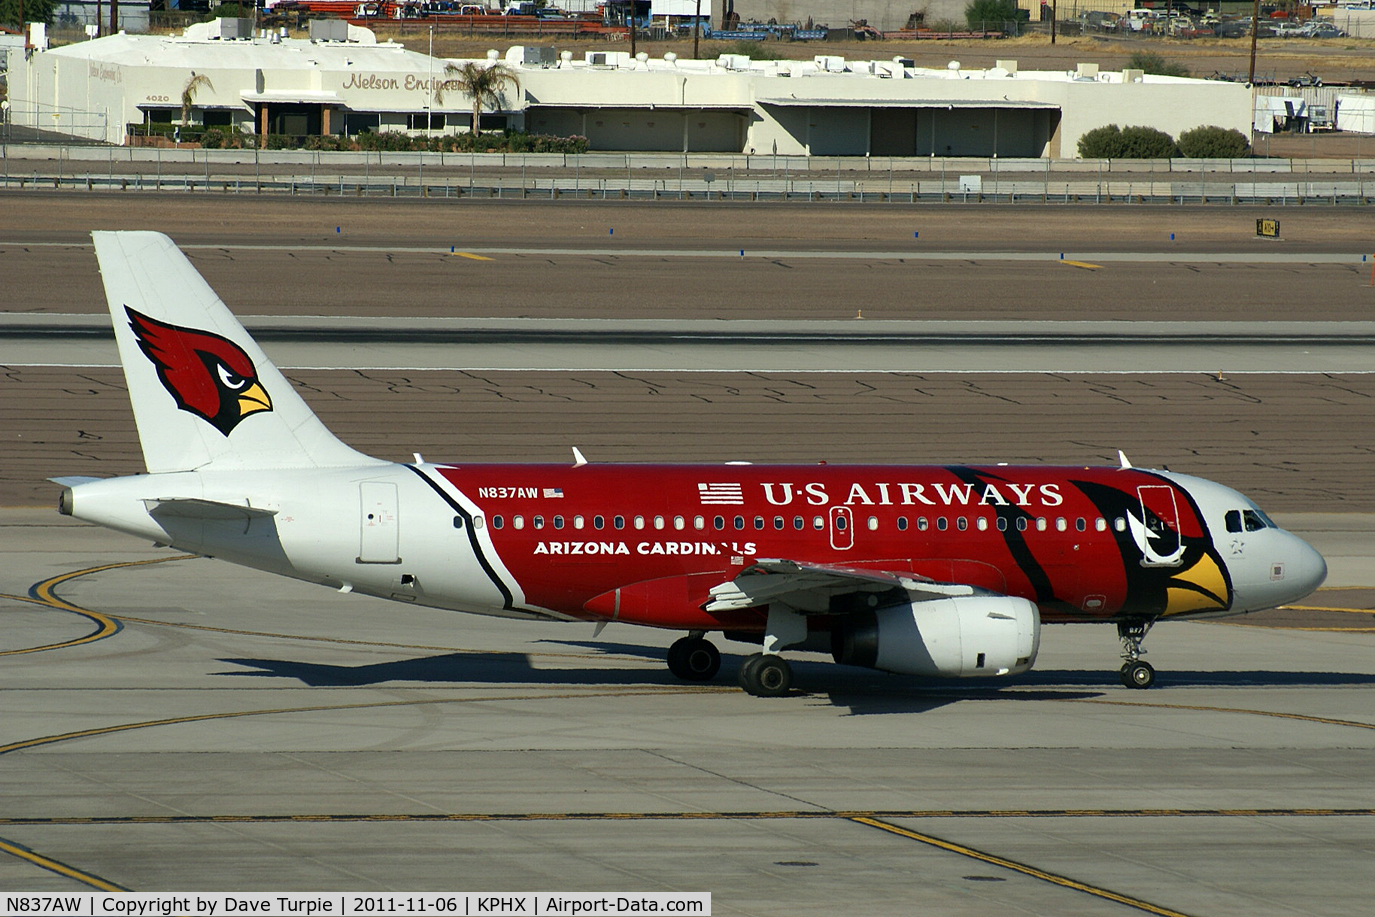 N837AW, 2005 Airbus A319-132 C/N 2595, No comment.